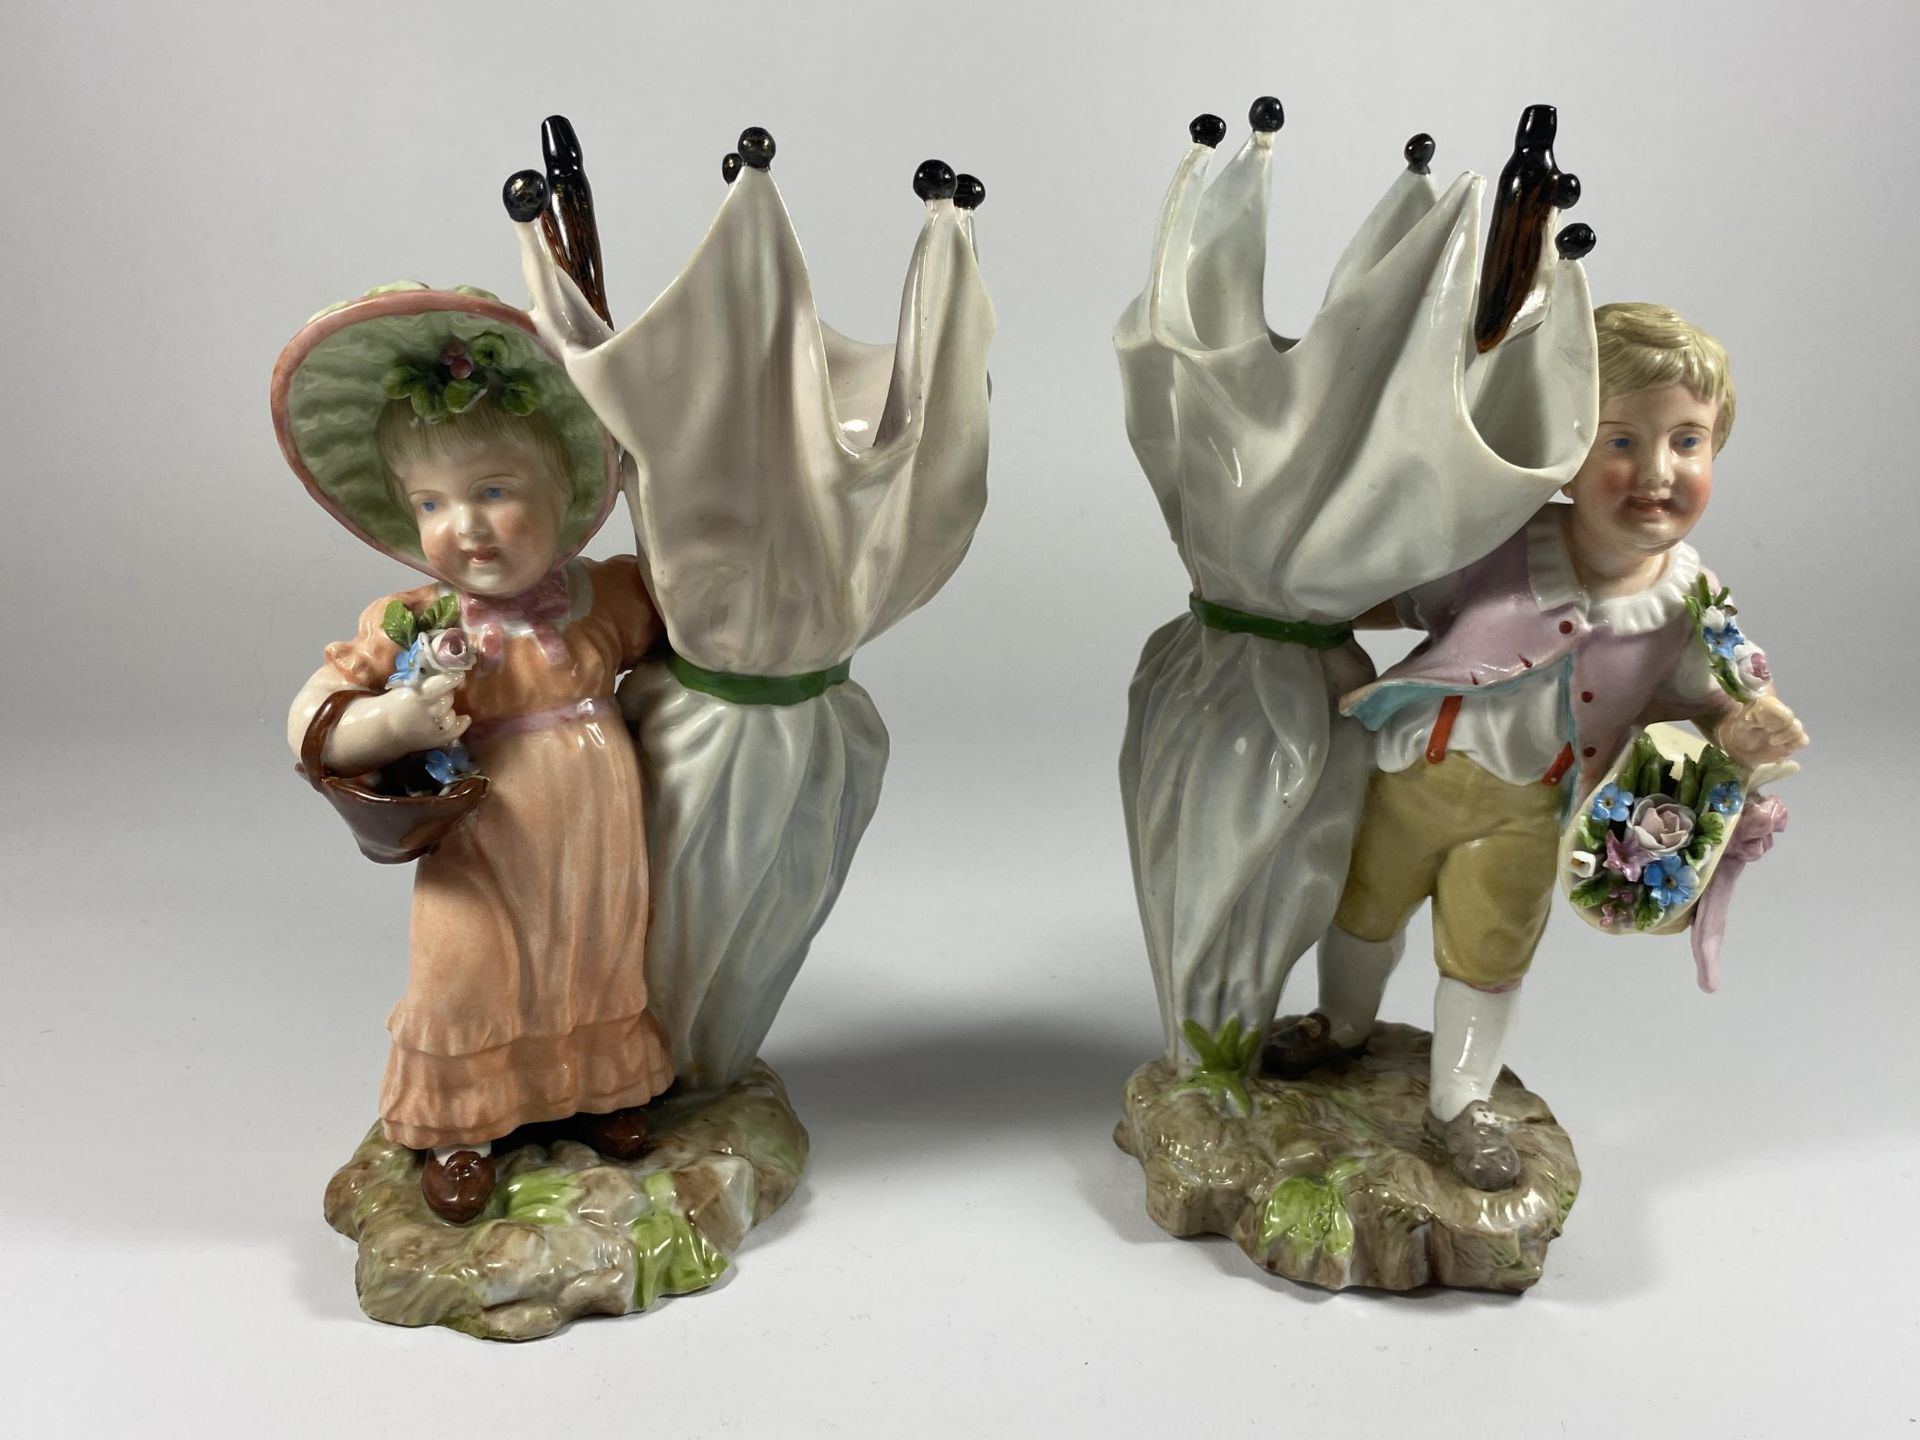 A PAIR OF 19TH CENTURY DRESDEN STYLE CONTINENTAL HARD PASTE PORCELAIN FIGURES WITH CROSSED SWORD